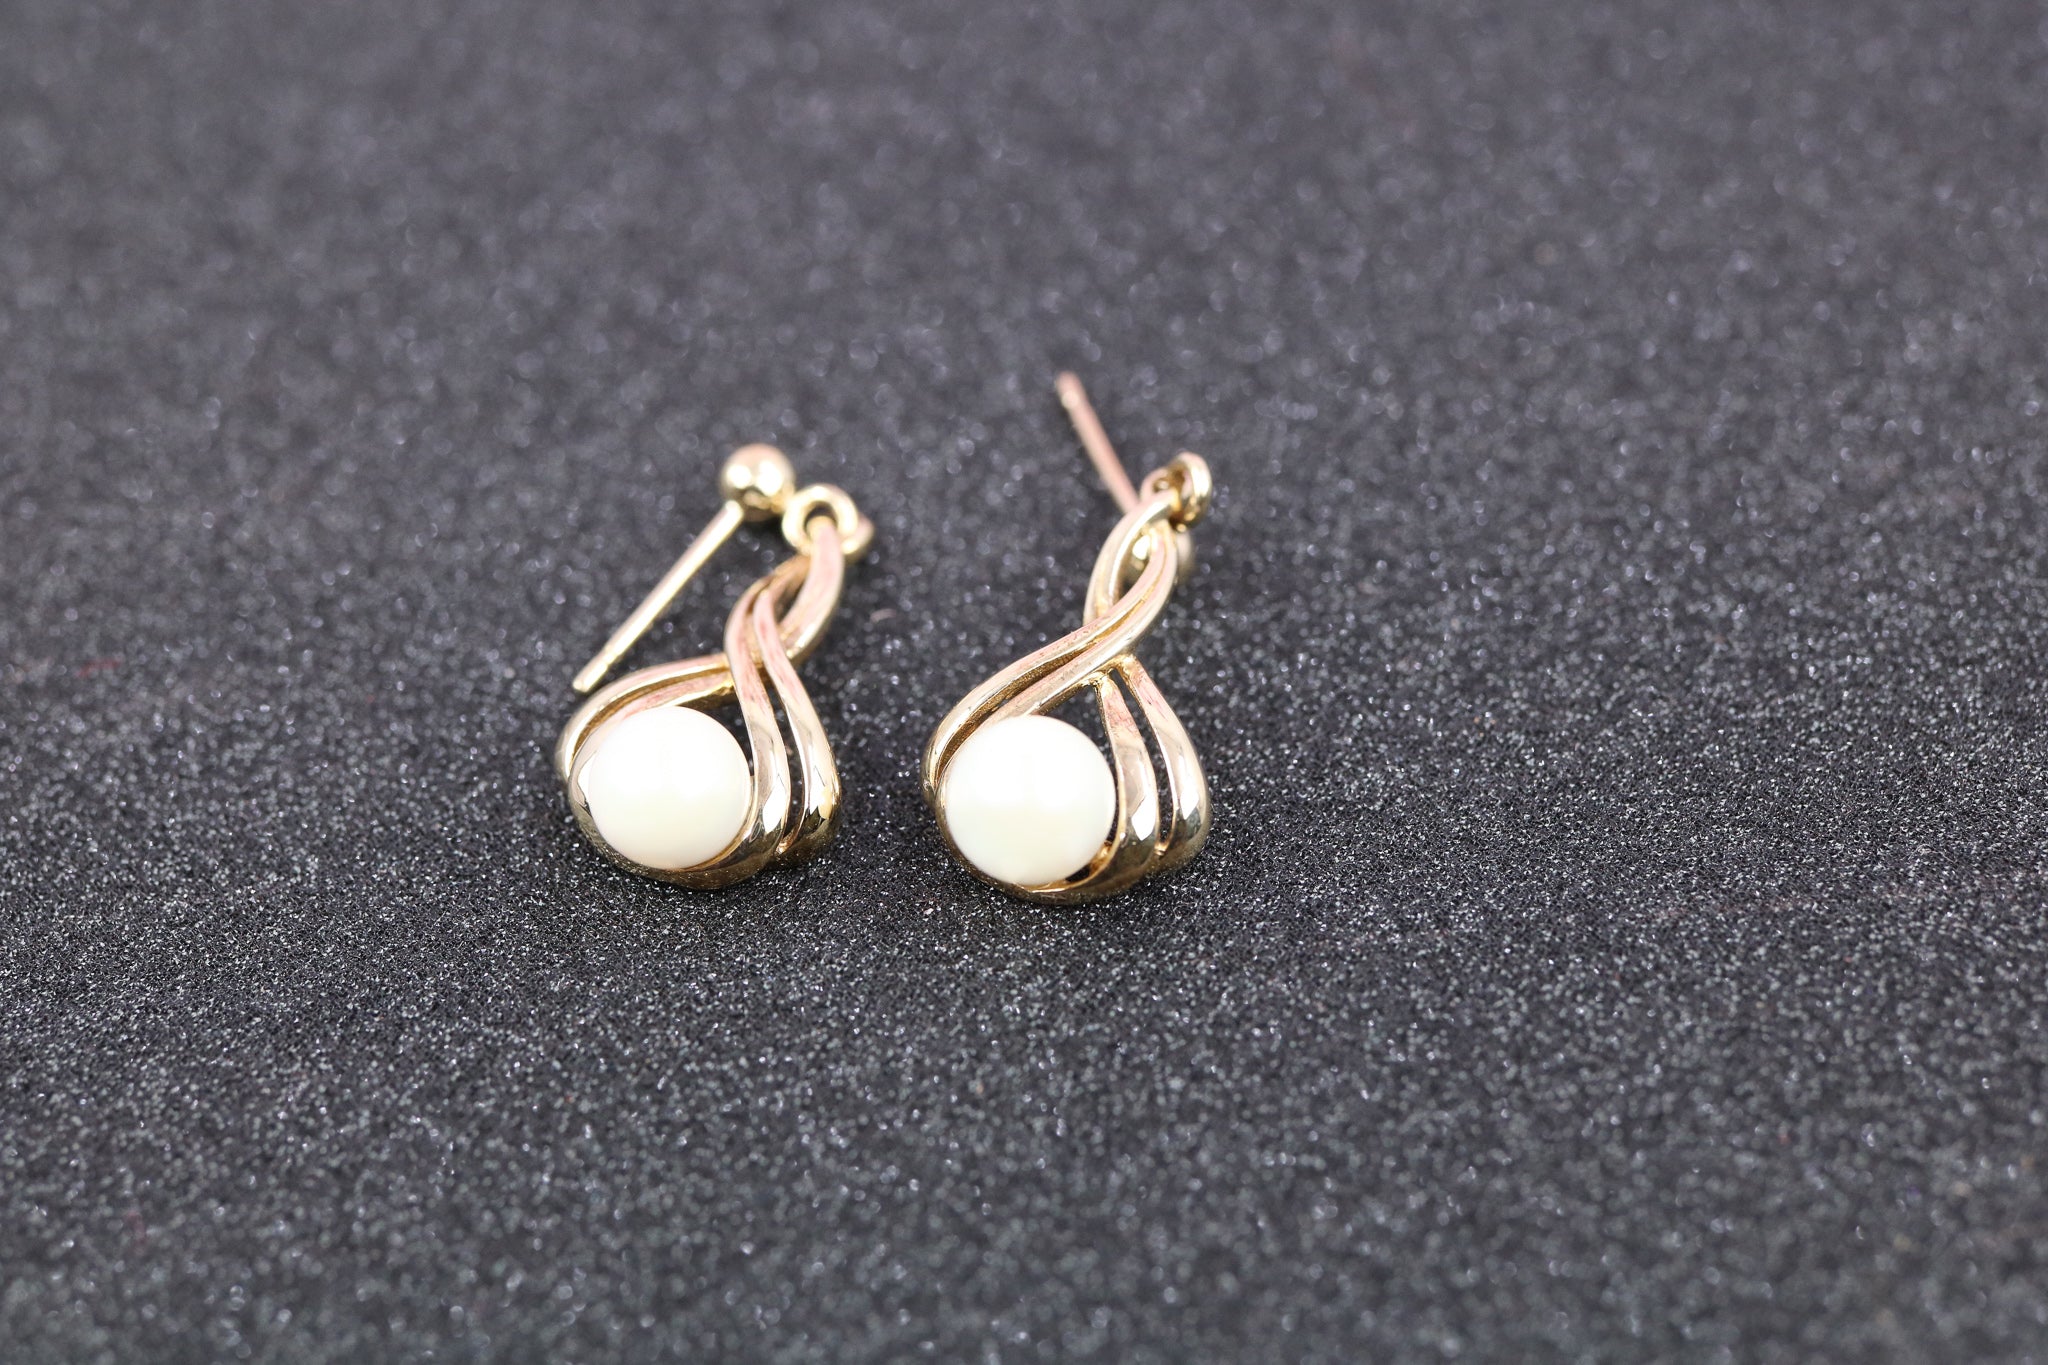 9ct Yellow Gold Earrings - HJ2762 - Hallmark Jewellers Formby & The Jewellers Bench Widnes